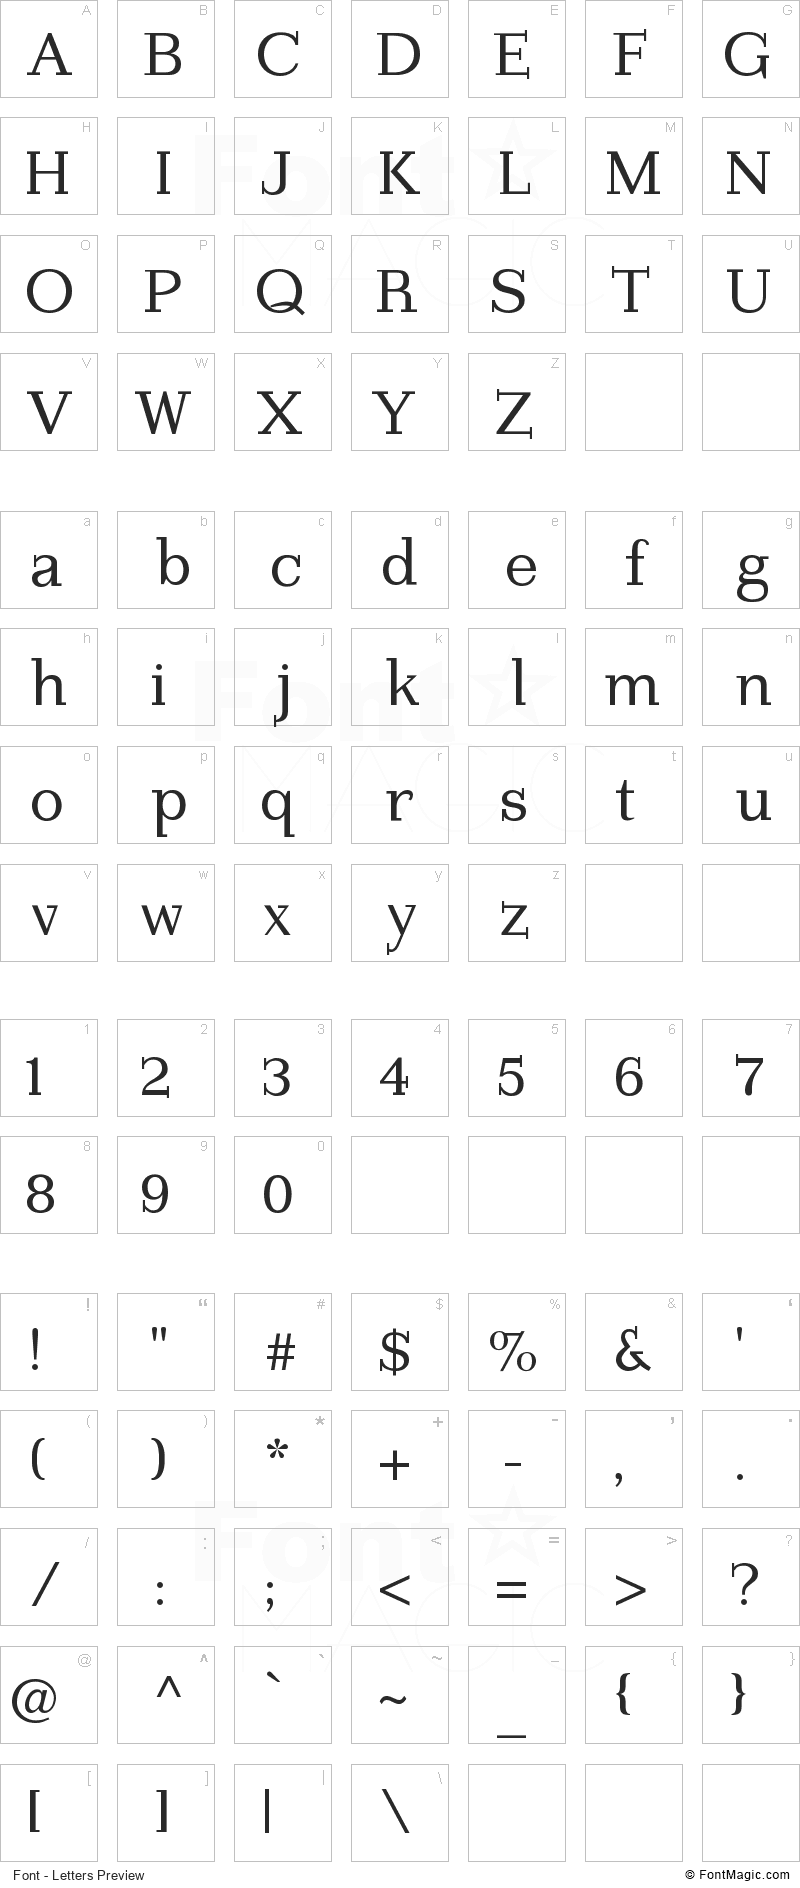 Imprimerie Font - All Latters Preview Chart